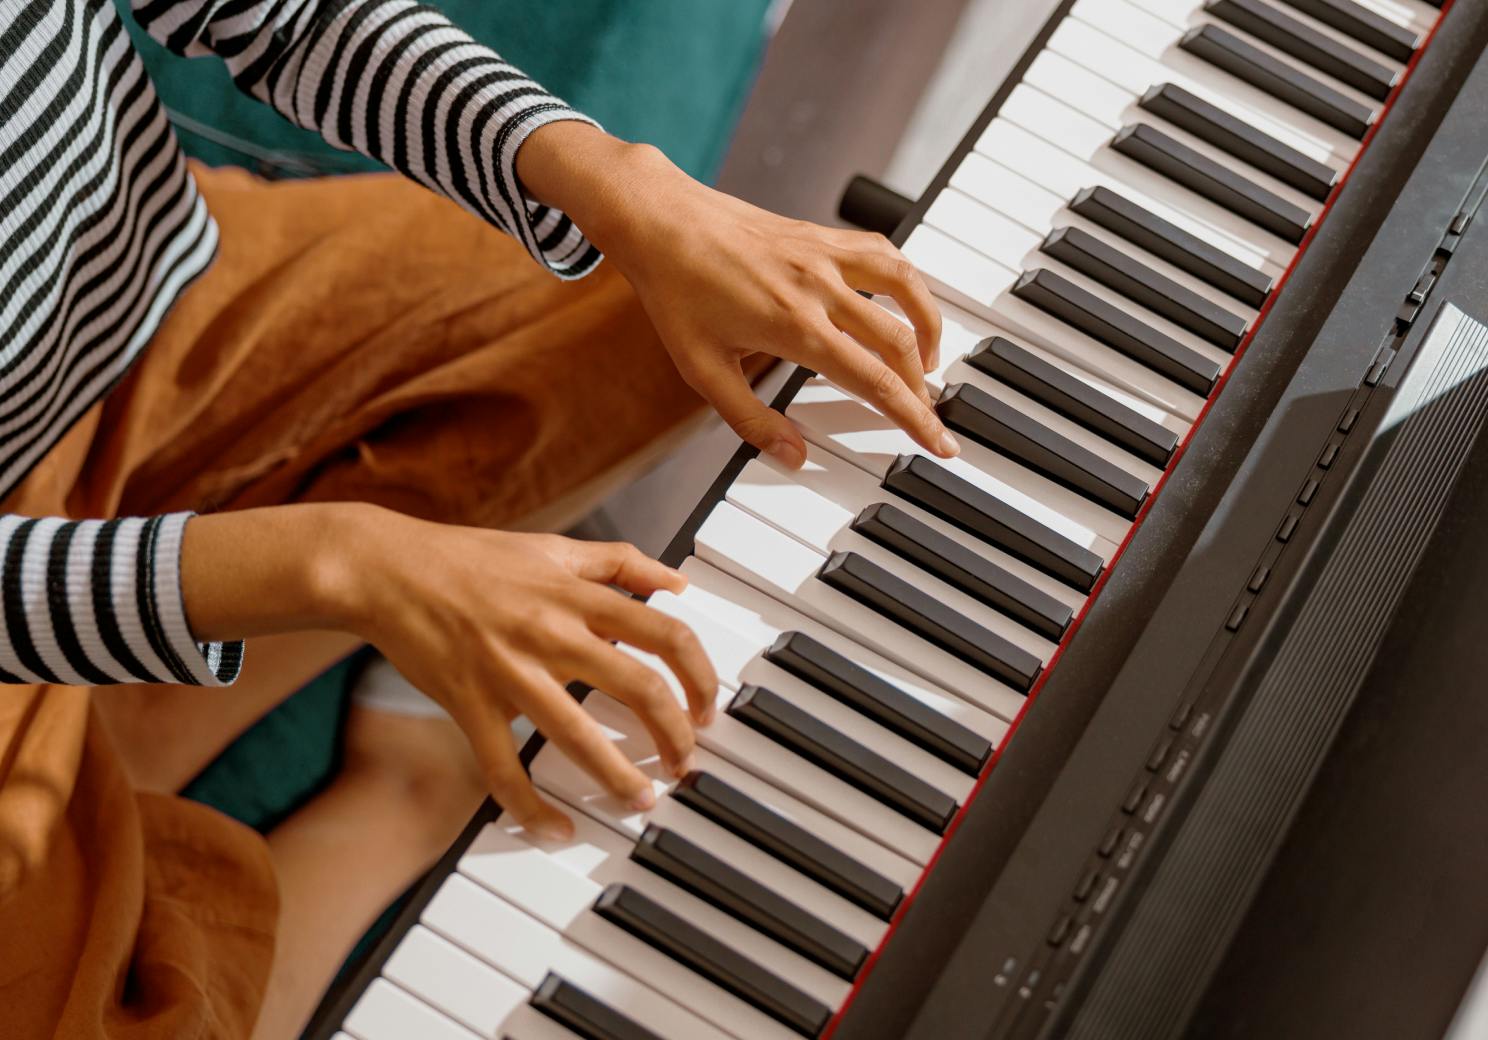 LUMI Keys and App: The world's first all-in-one platform for learning how to play piano! Compact, portable, and wireless, LUMI Keys travel wherever you want to make music. With a light-up keyboard, games, lessons, and popular songs find a fun and easy way to learn how to play piano. 